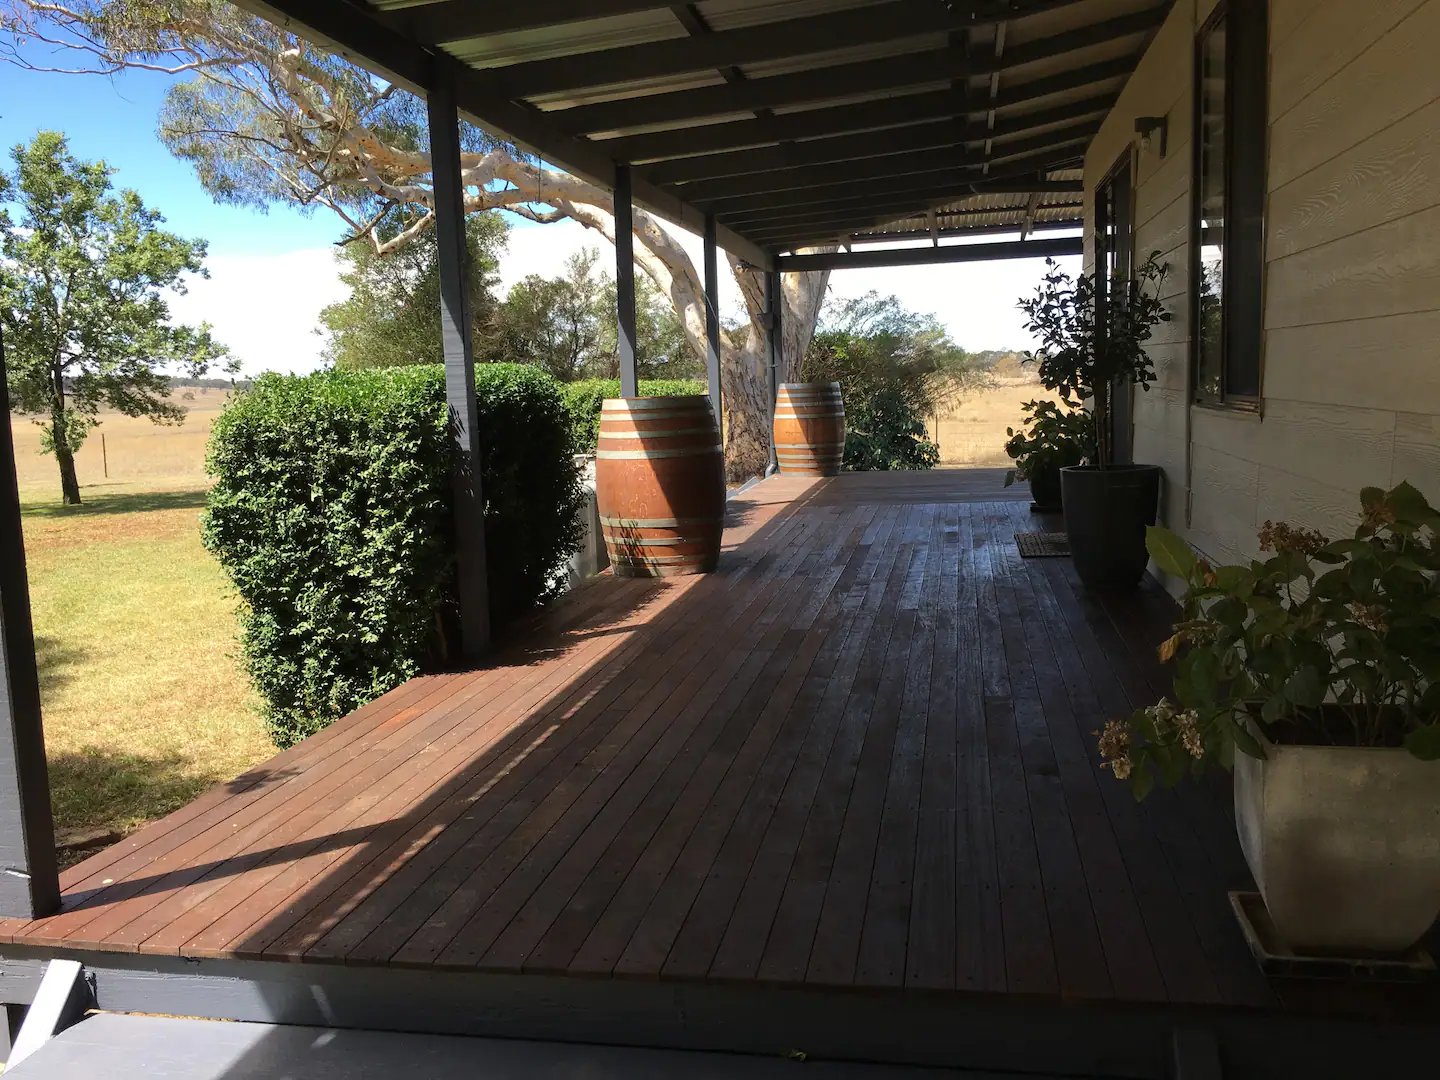 The Lodge Farm - Airbnb Canberra